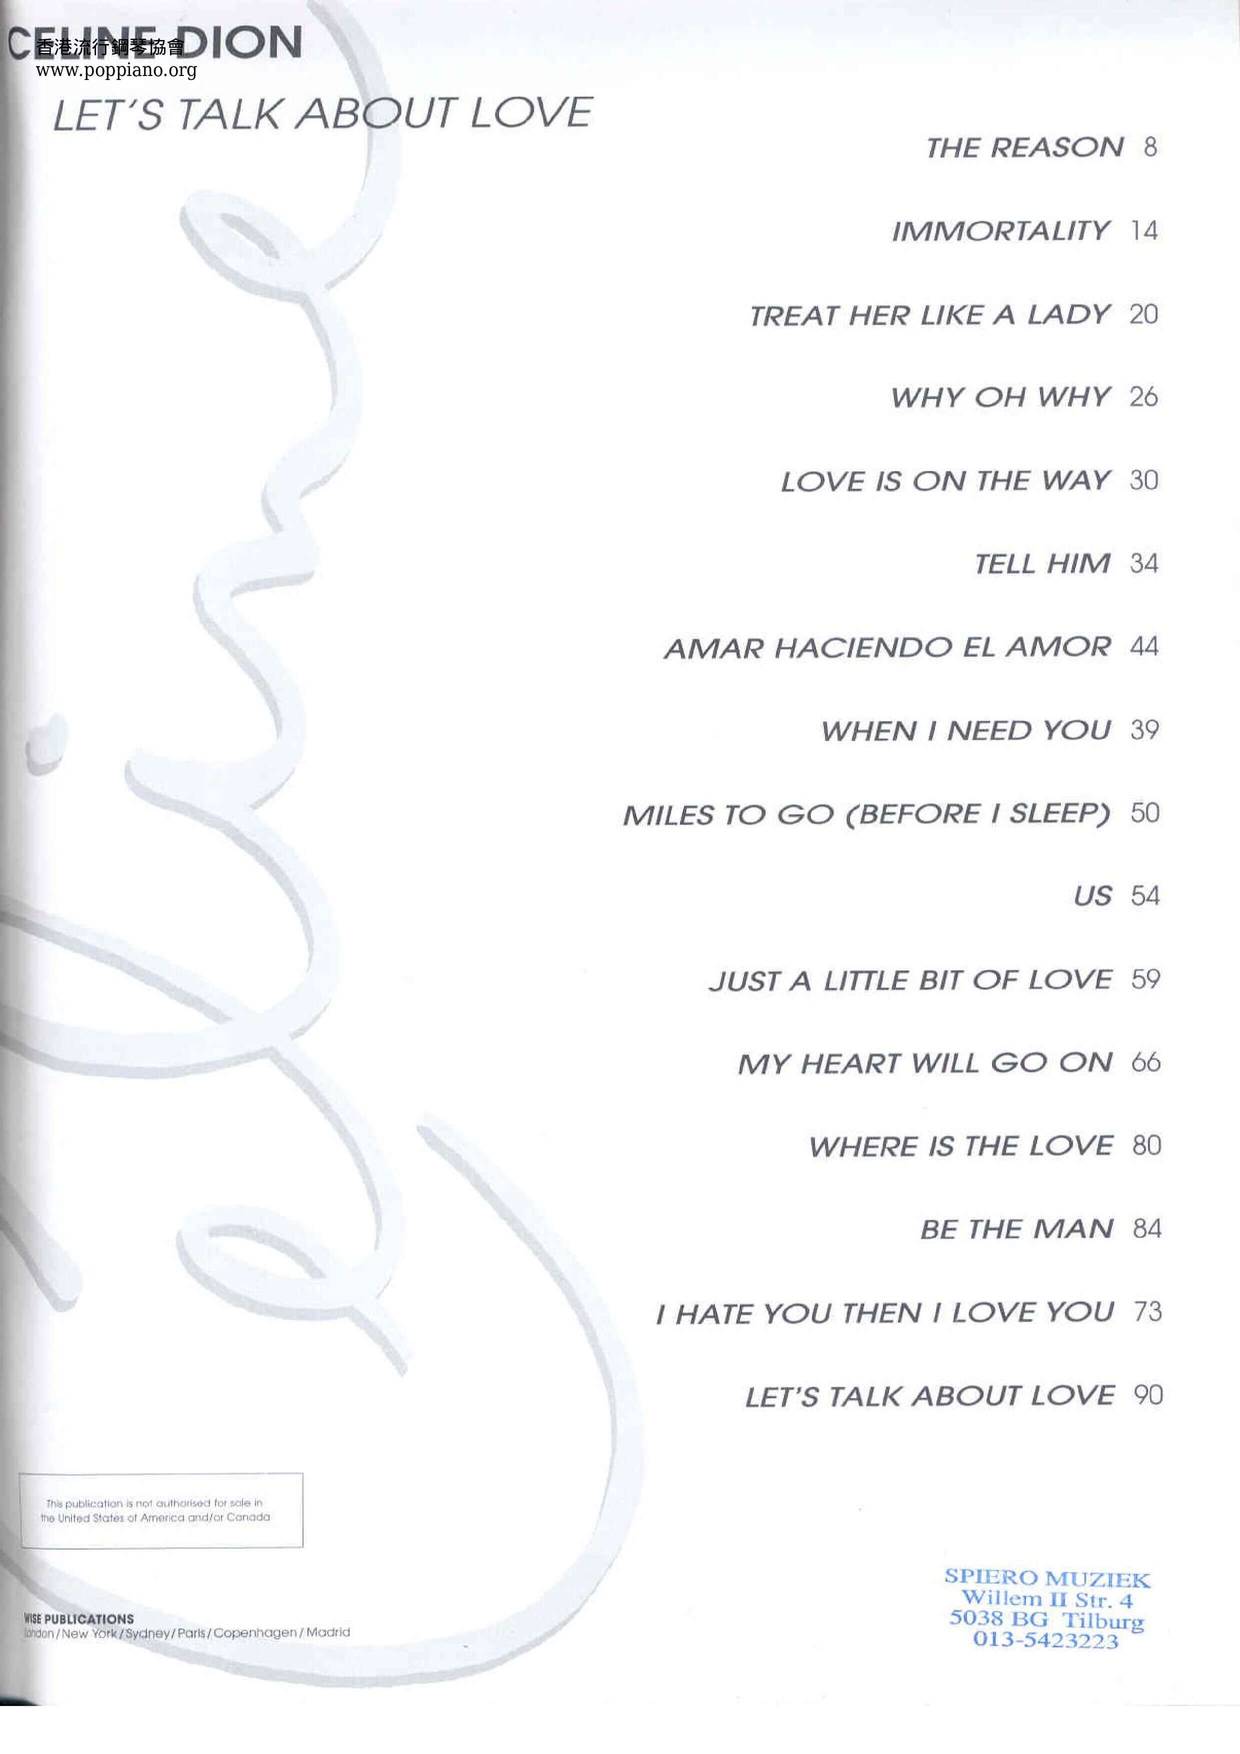 Celine Dion Songbook 90 Pages琴譜